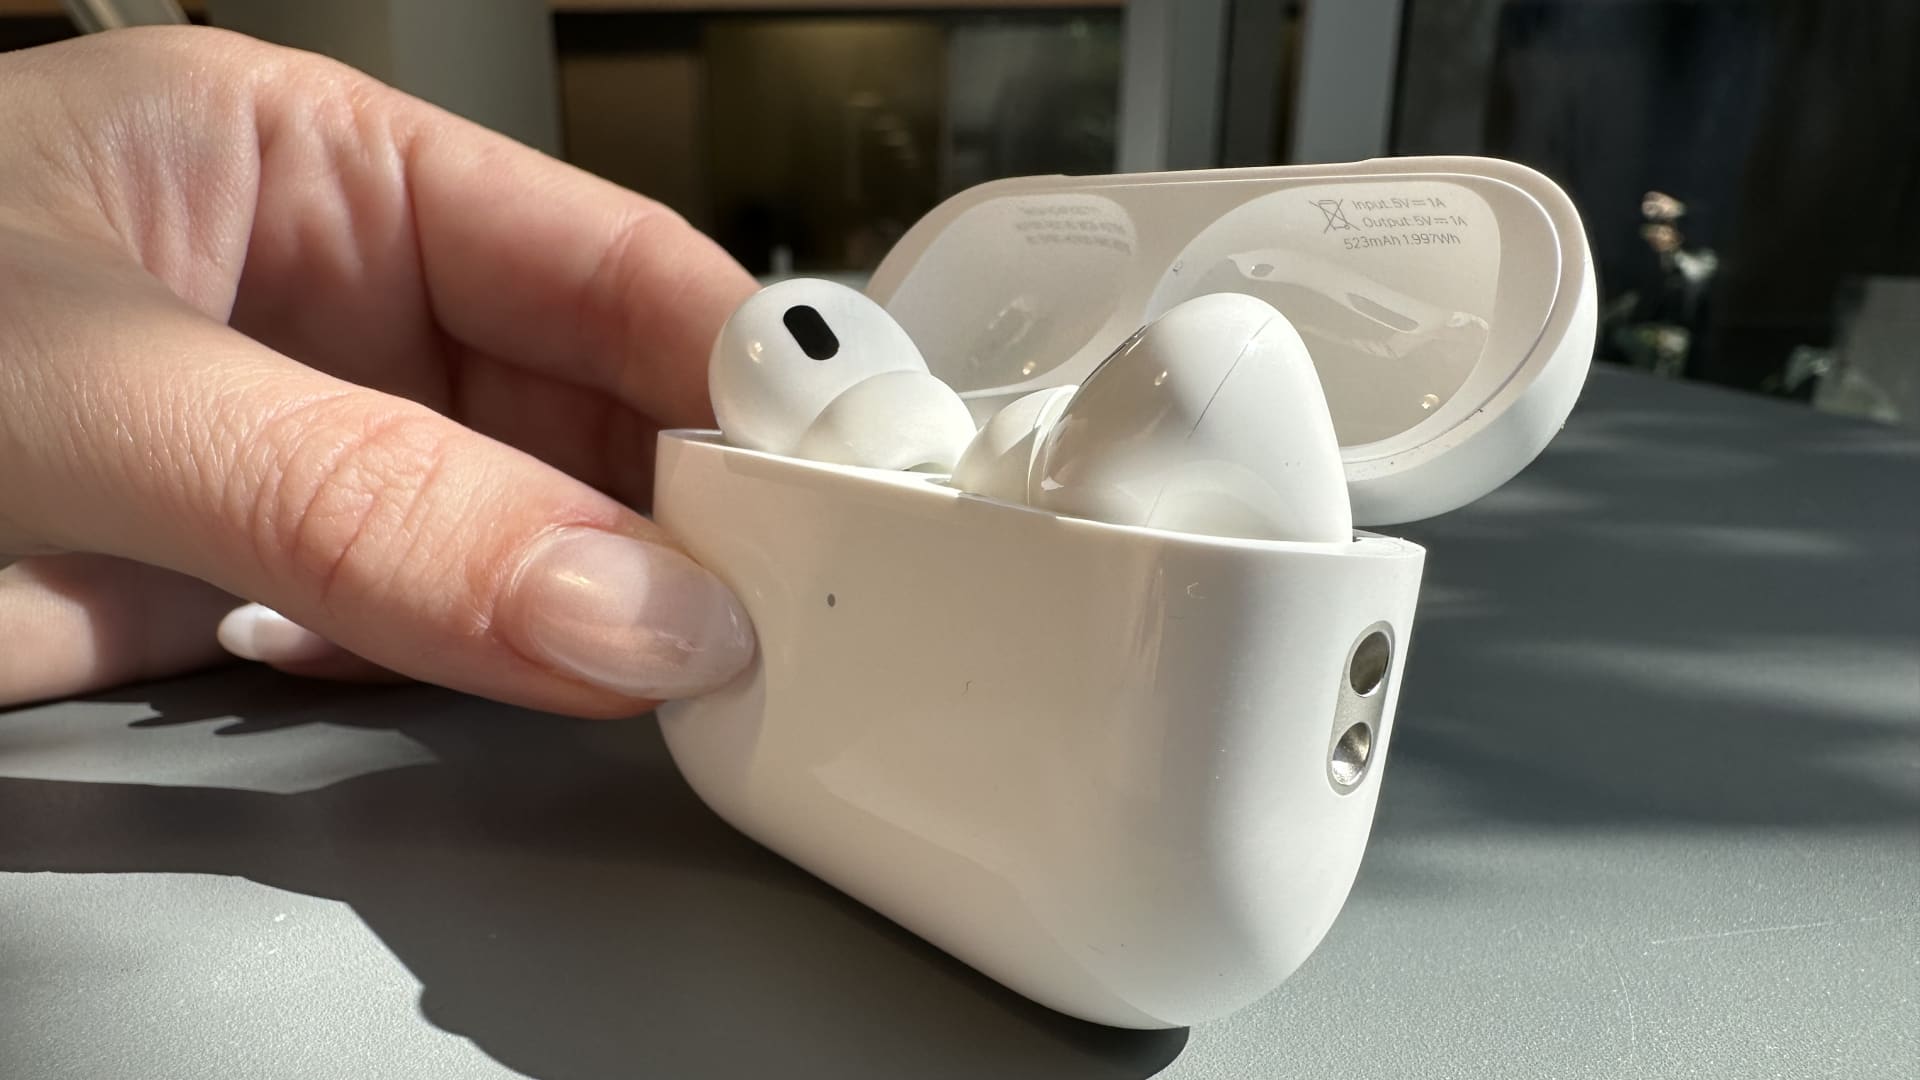 How to get the most out of Apple’s new AirPods